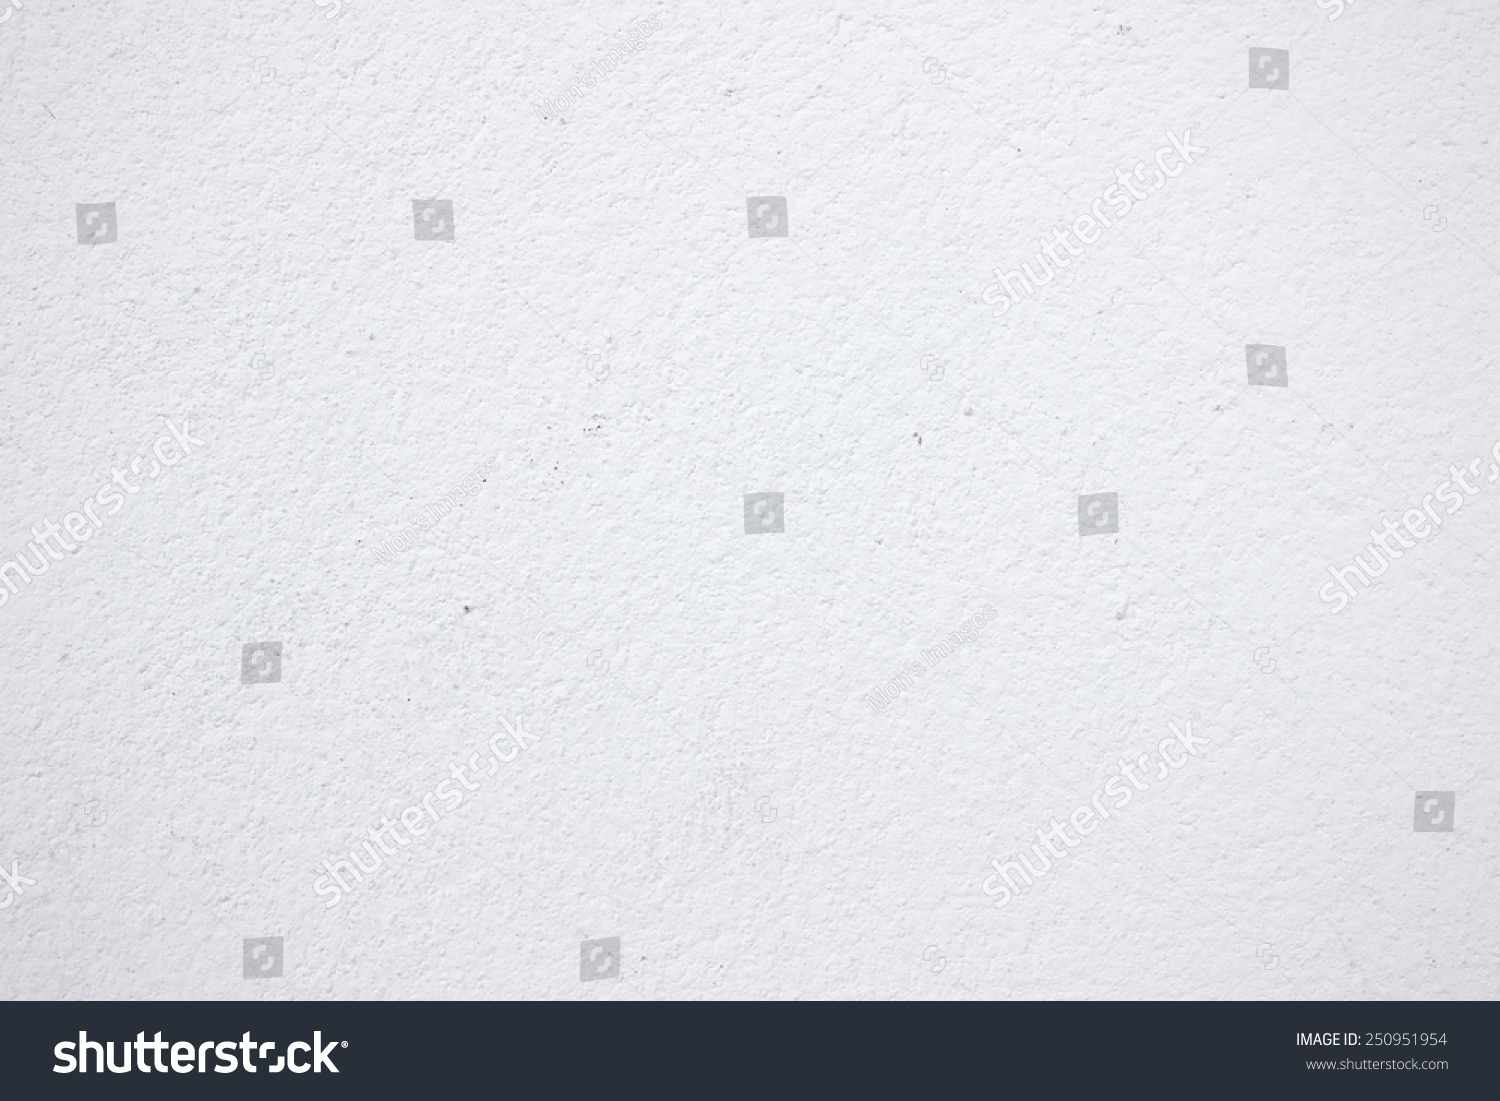 45,146 Smooth plaster wall Images, Stock Photos & Vectors | Shutterstock